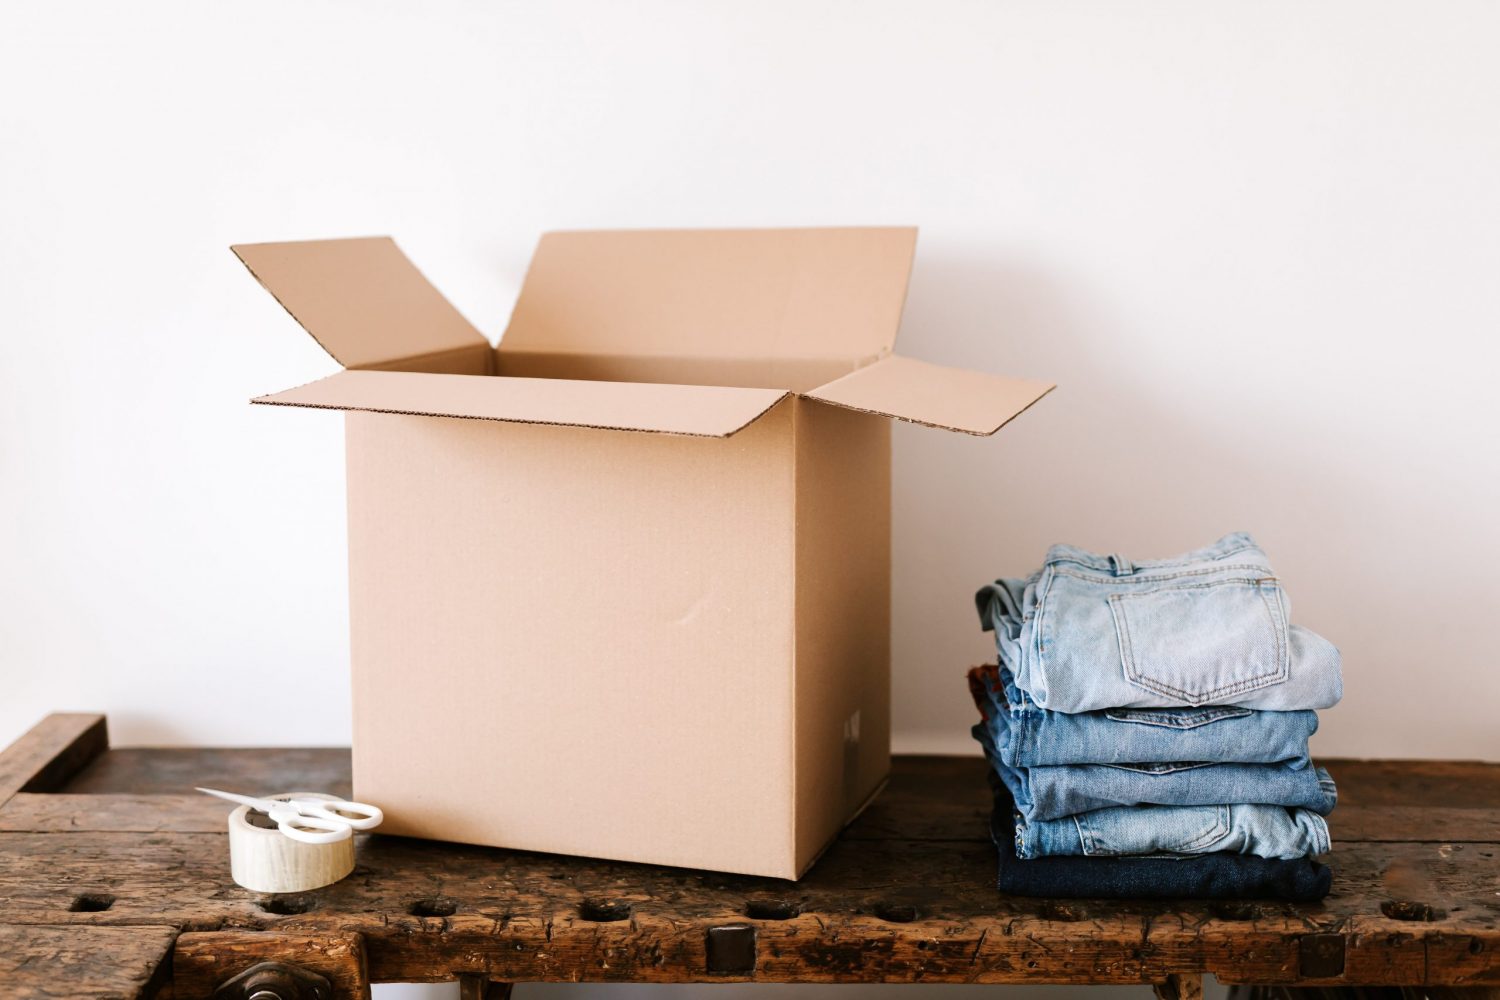 stack-of-jeans-near-carton-box-and-tape-4498141